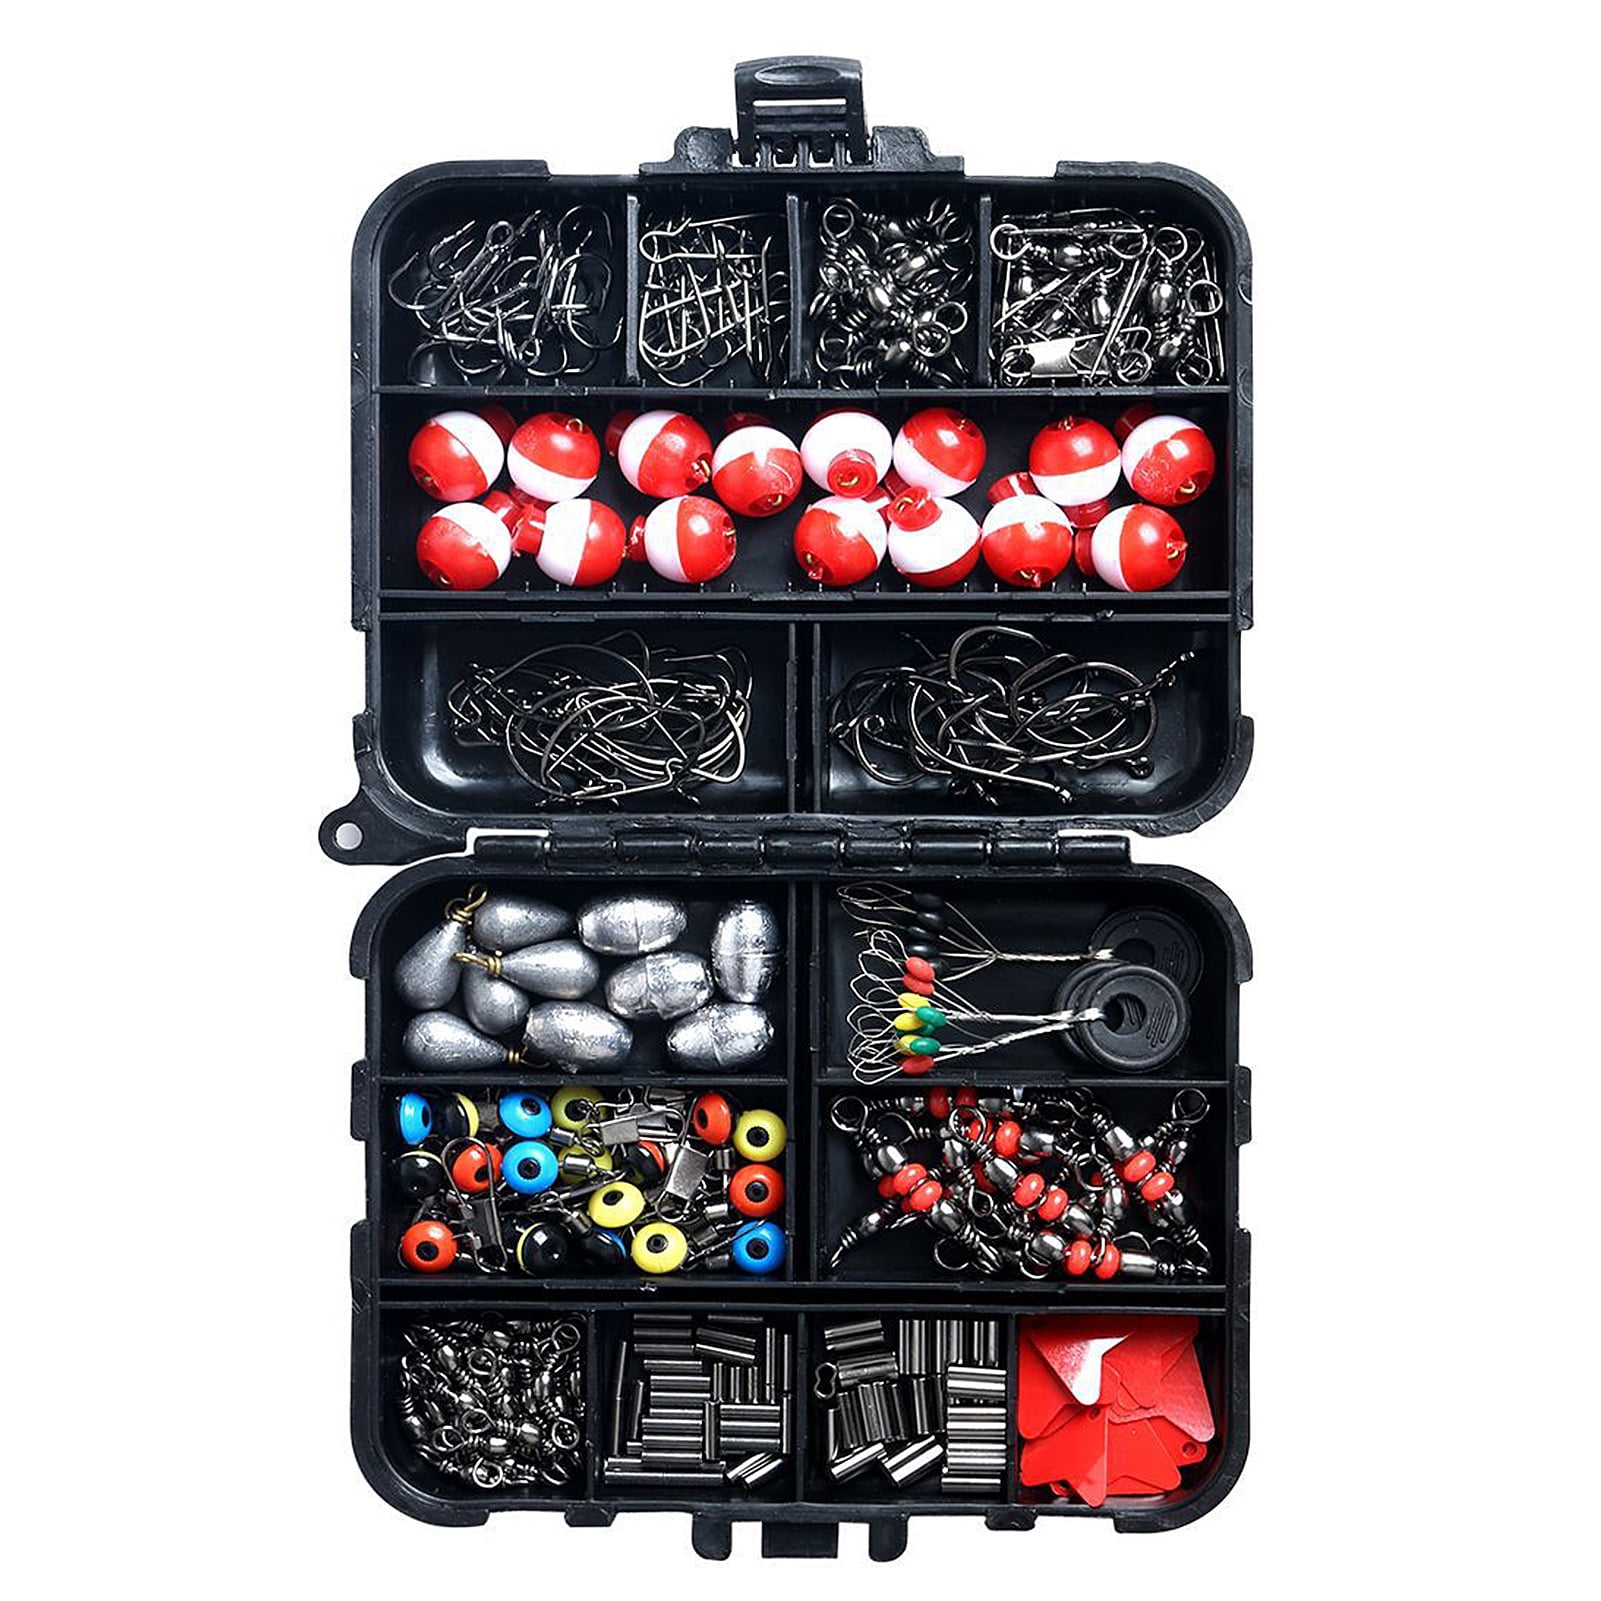 Eccomum 263pcs Fishing Accessories Set with Tackle Box Including Plier Jig  Hooks Weight Swivels Snaps Slides 